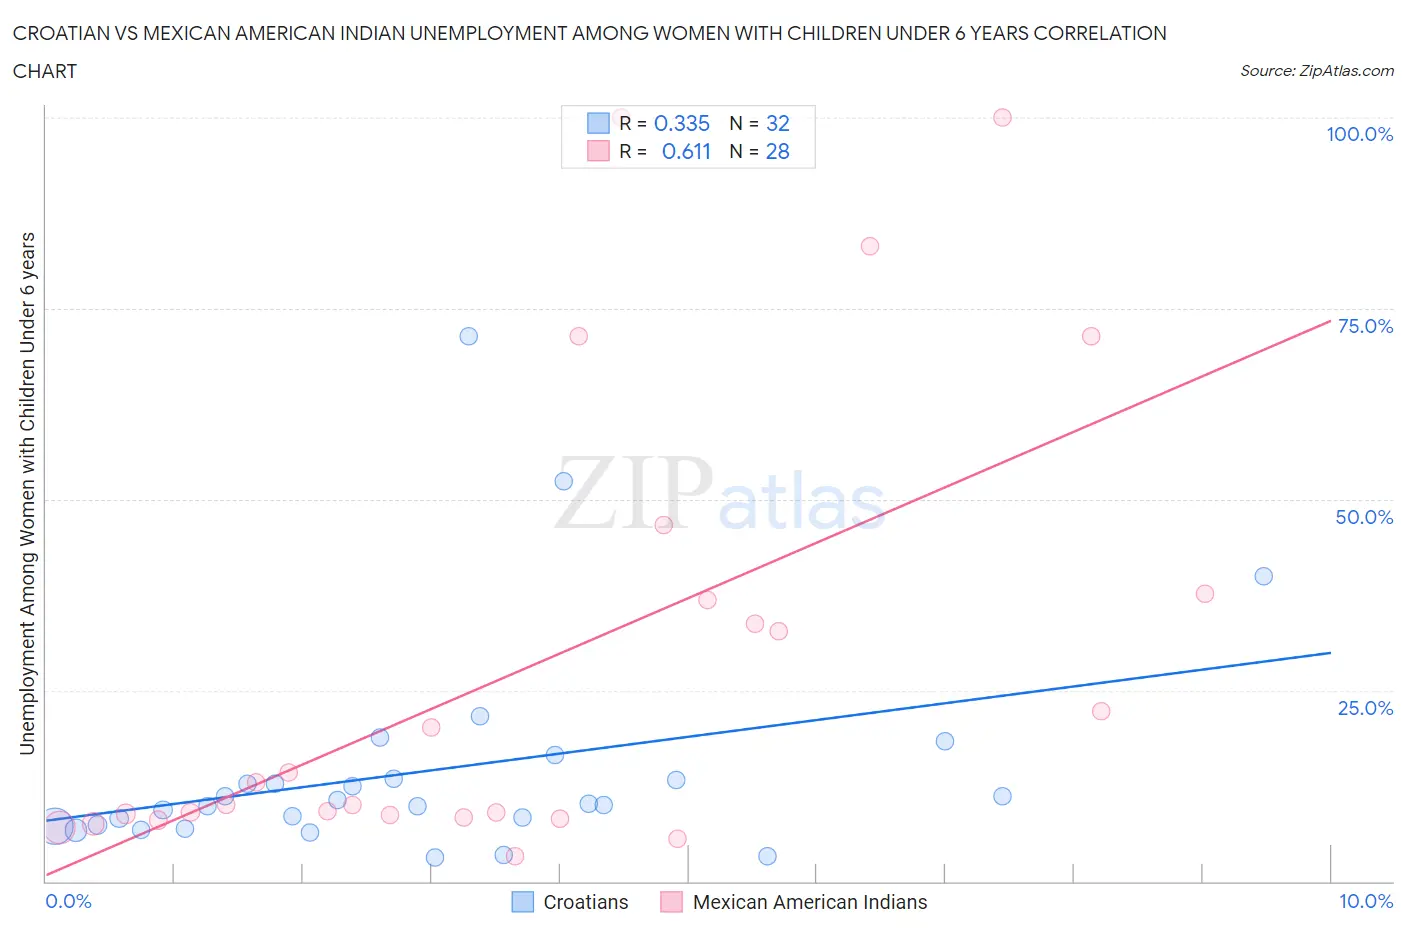 Croatian vs Mexican American Indian Unemployment Among Women with Children Under 6 years